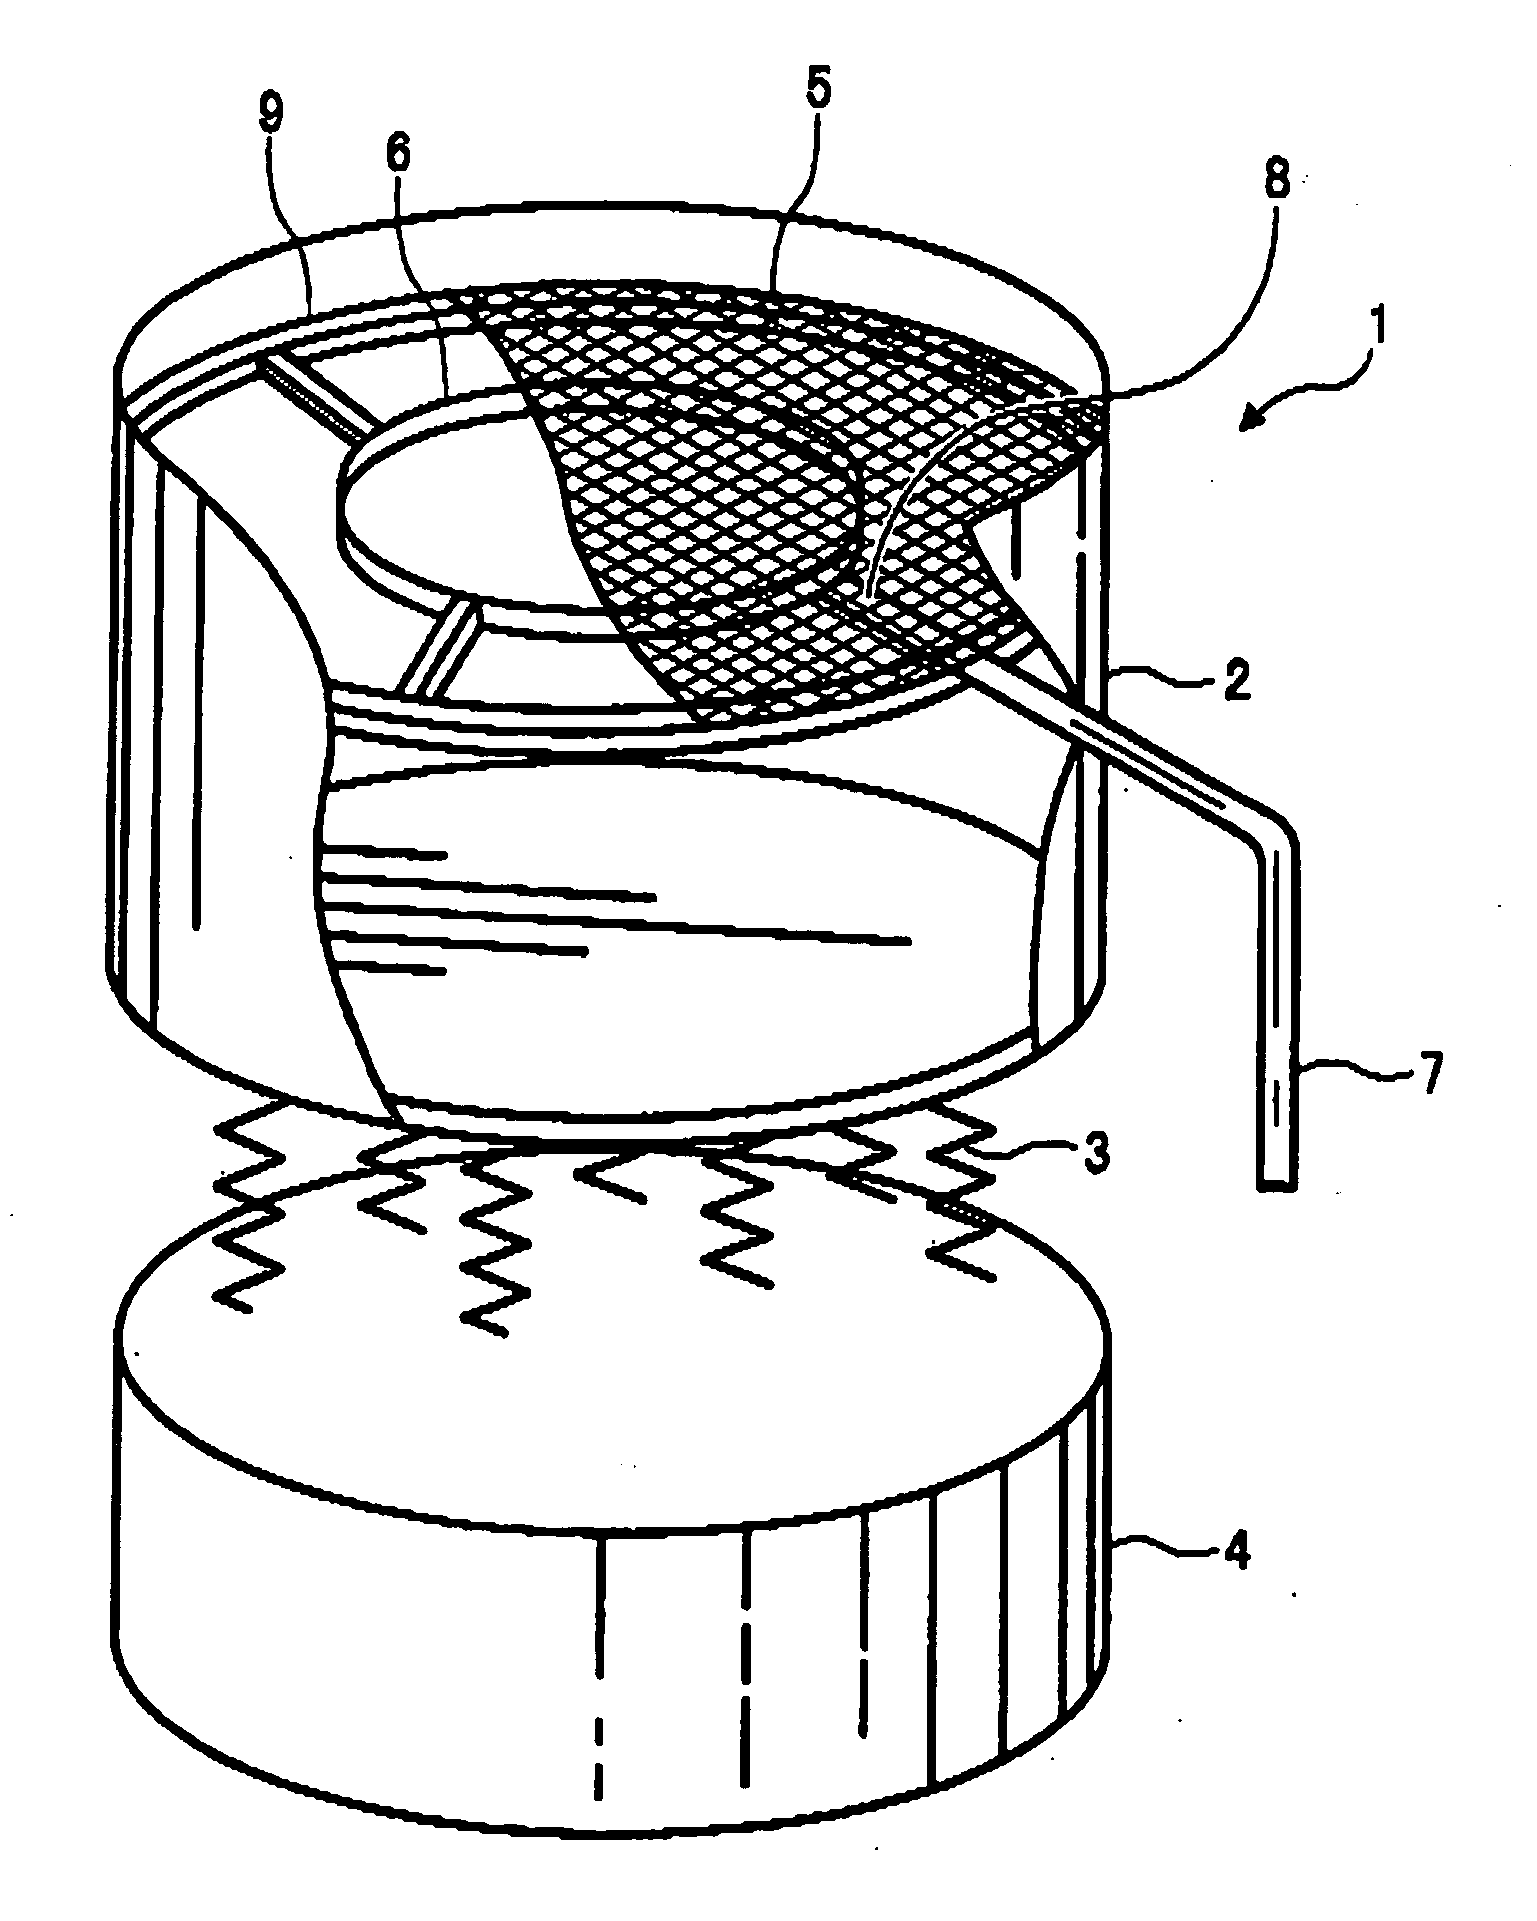 Electrophotographic developing carrier, associated apparatus and methodology of classification and application